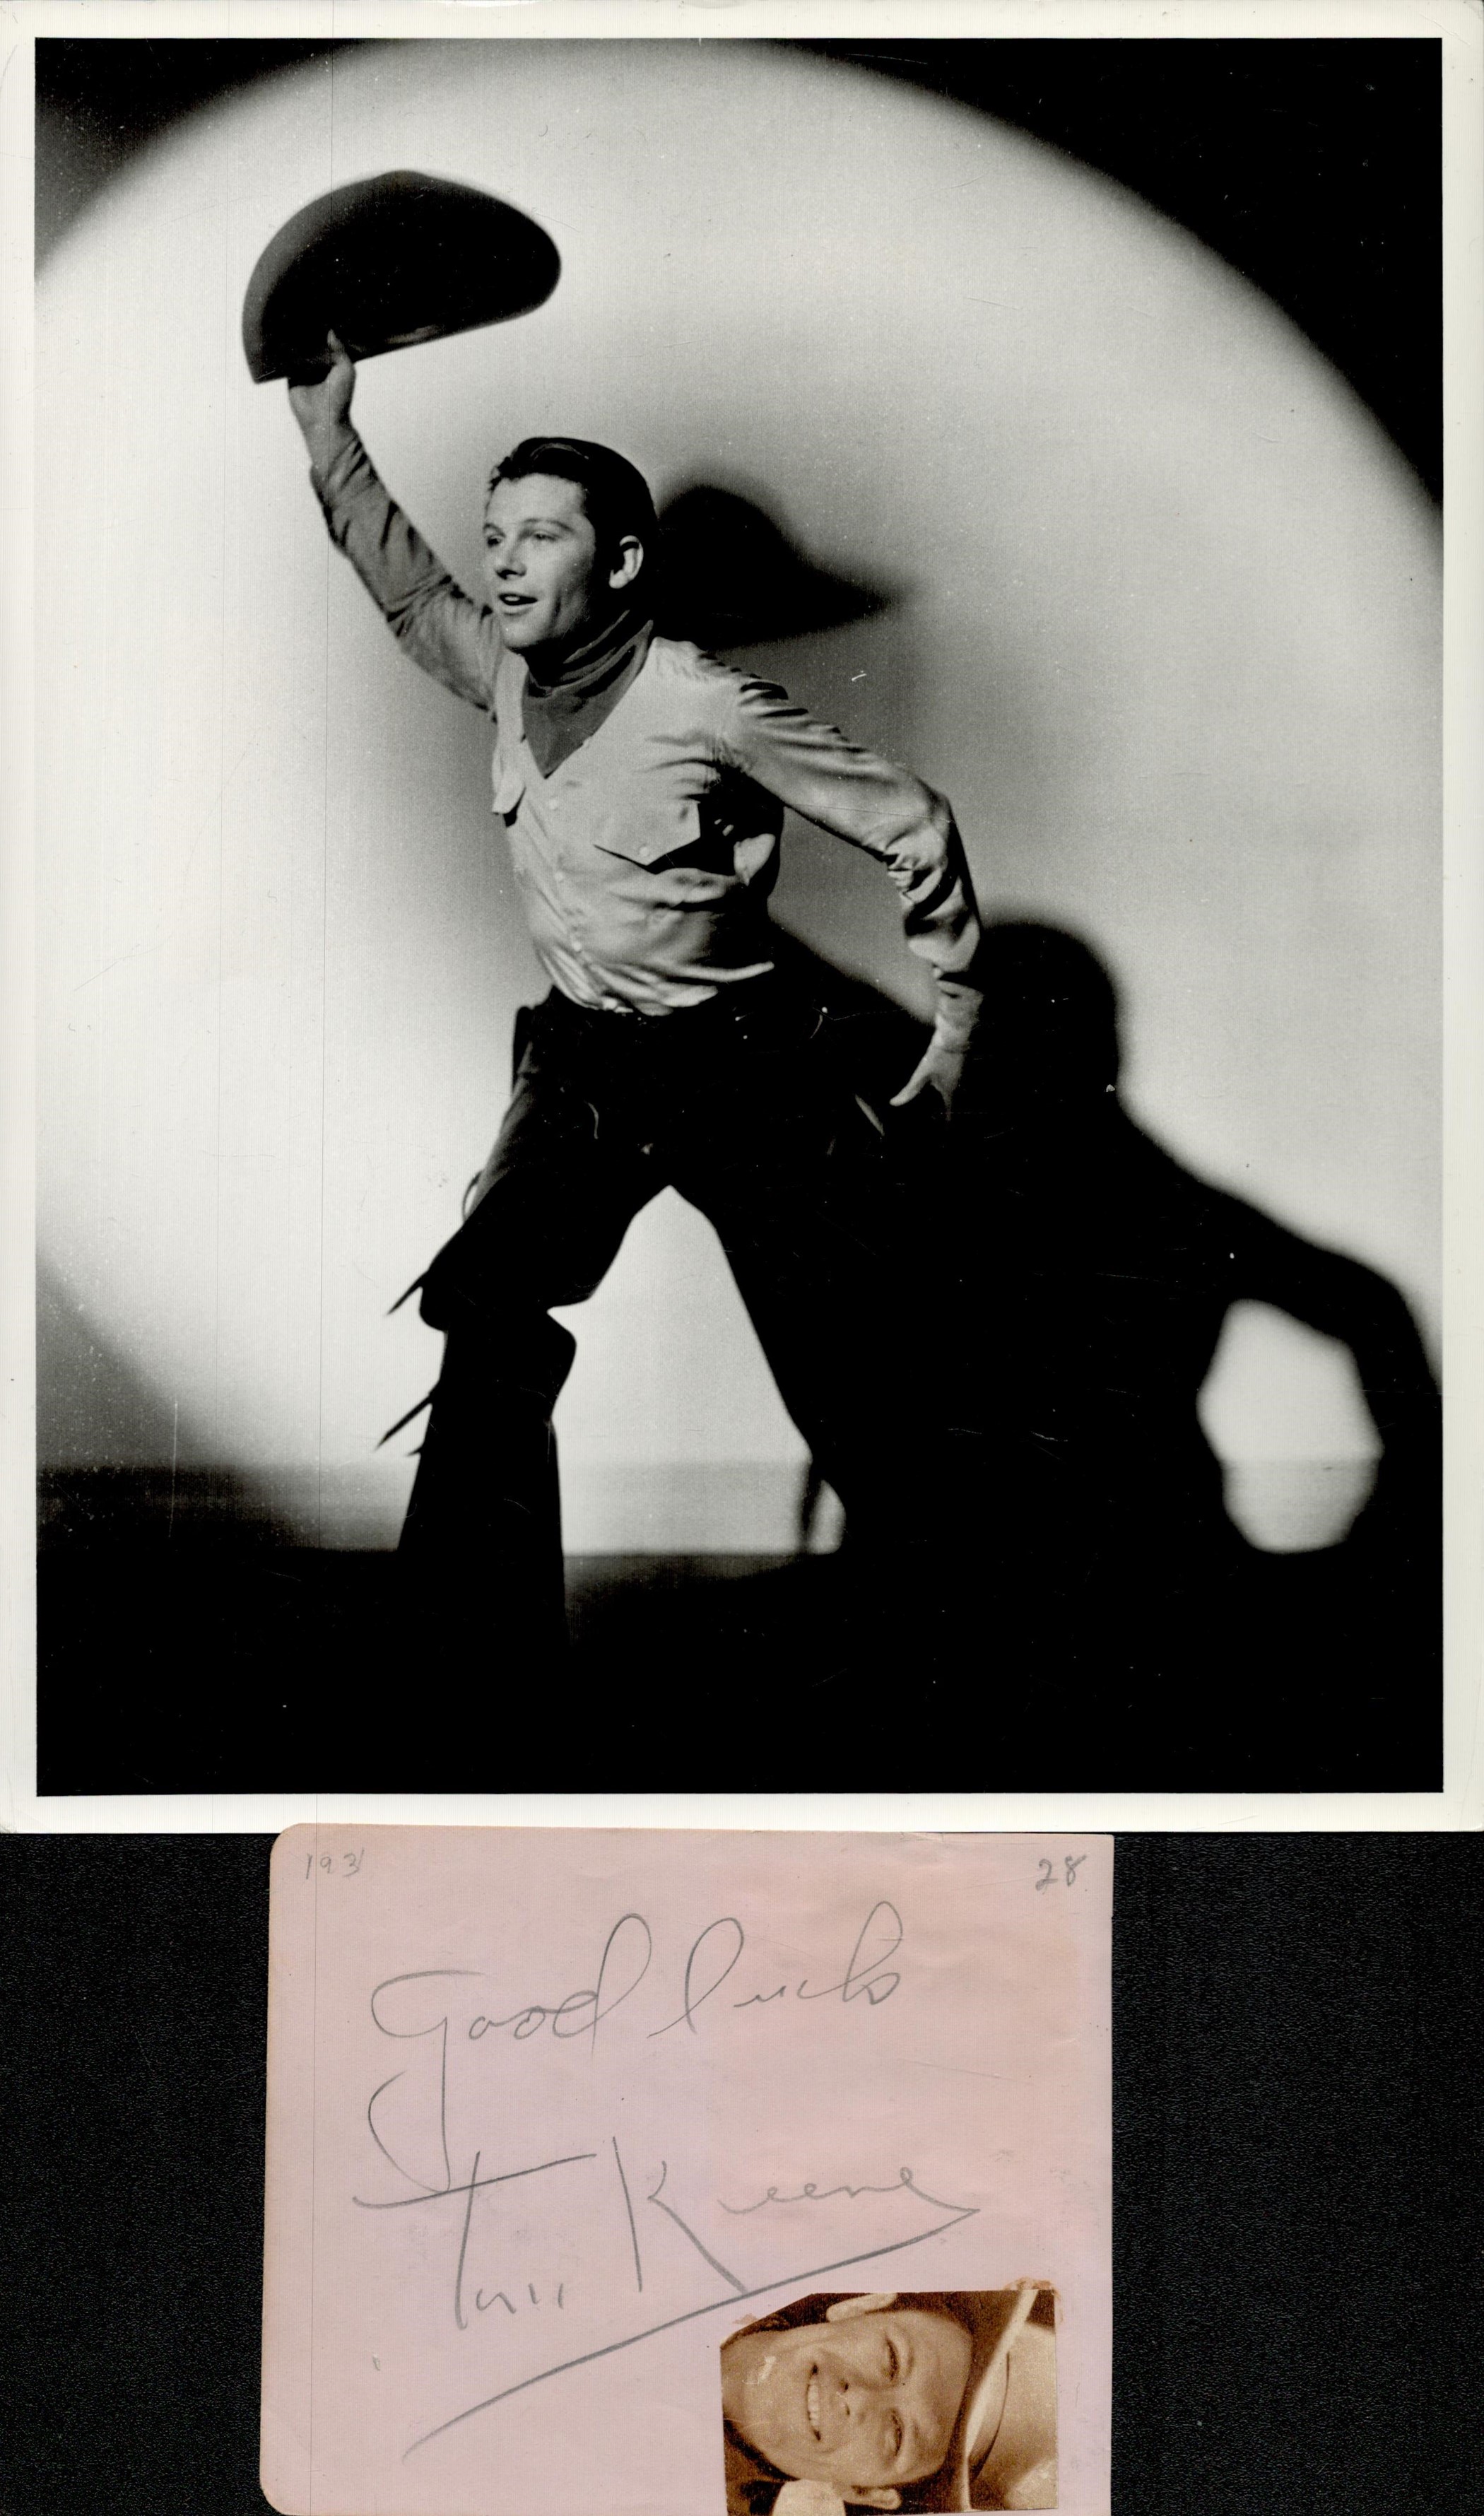 Tom Keane signed 5x4 inch album page and vintage 10x8 inch black and white photo. Good condition